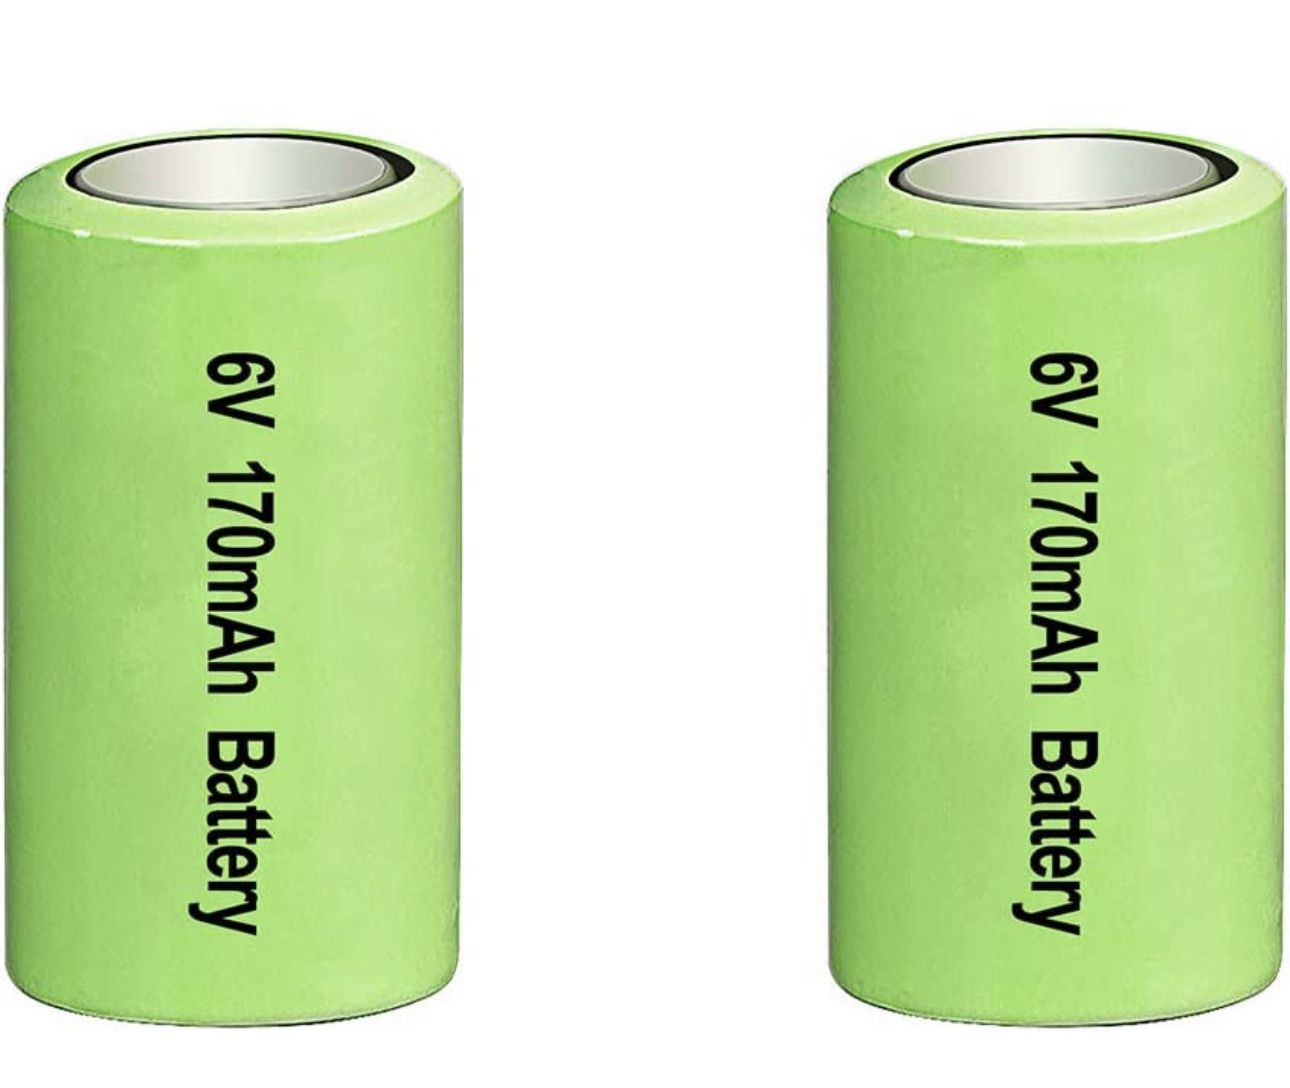 Amityke 6V Battery for pet Stop Dog Collar Compatible with PCC-100 & PCC-200 PTPIR-003 PTPFS-003 Systems for Pet Stop Collars 2 pack